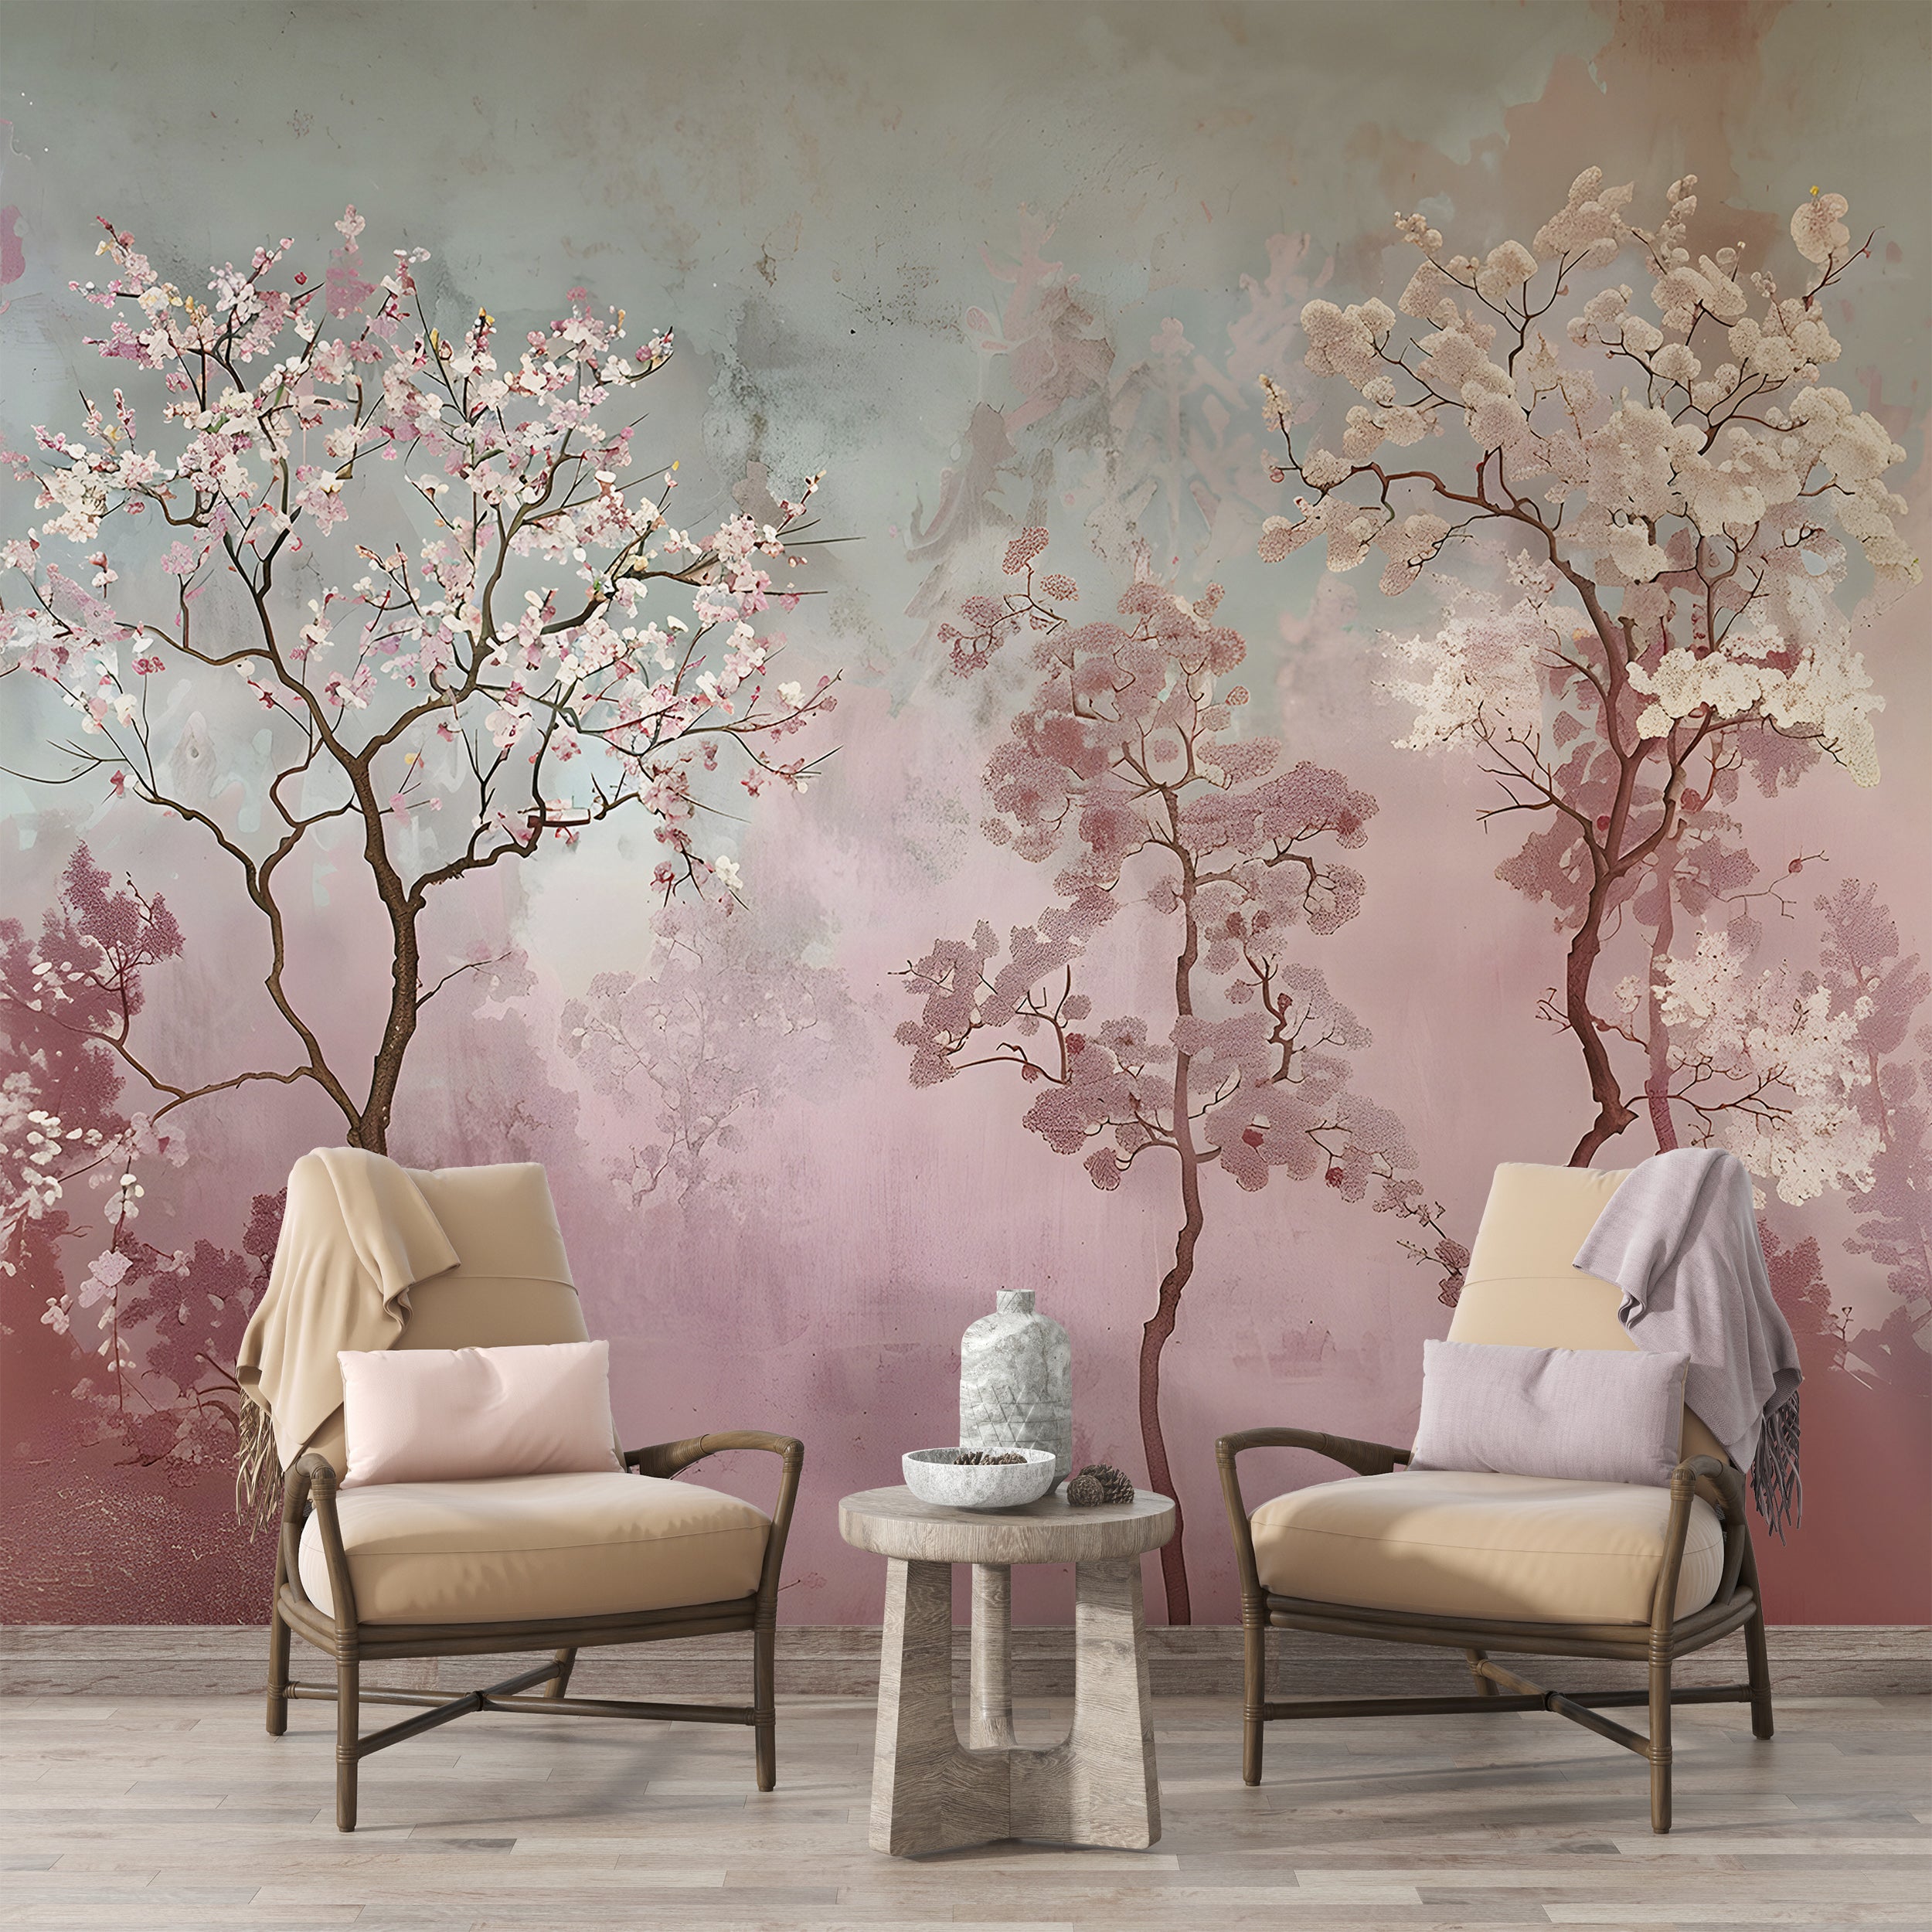 Muted colors trees wallpaper Soft pink watercolor trees wall mural